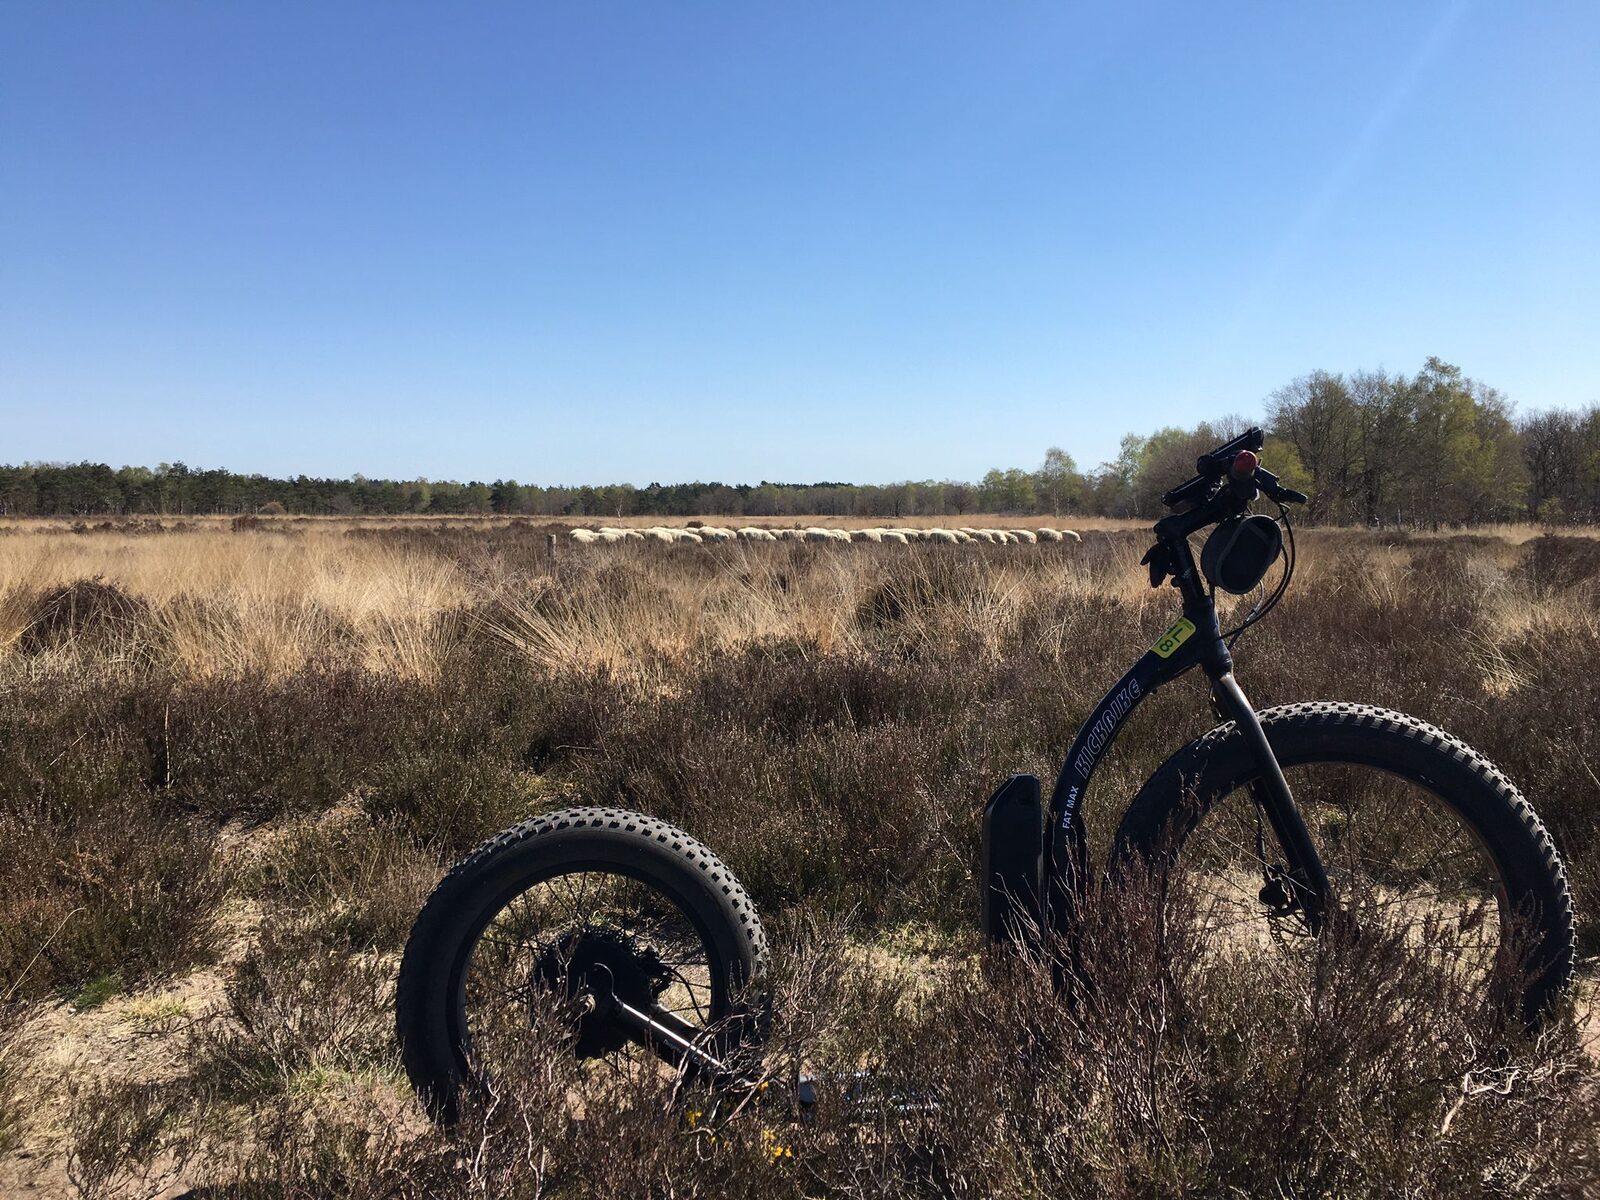 🛴 Kickbike Fatbikes from Green Valley